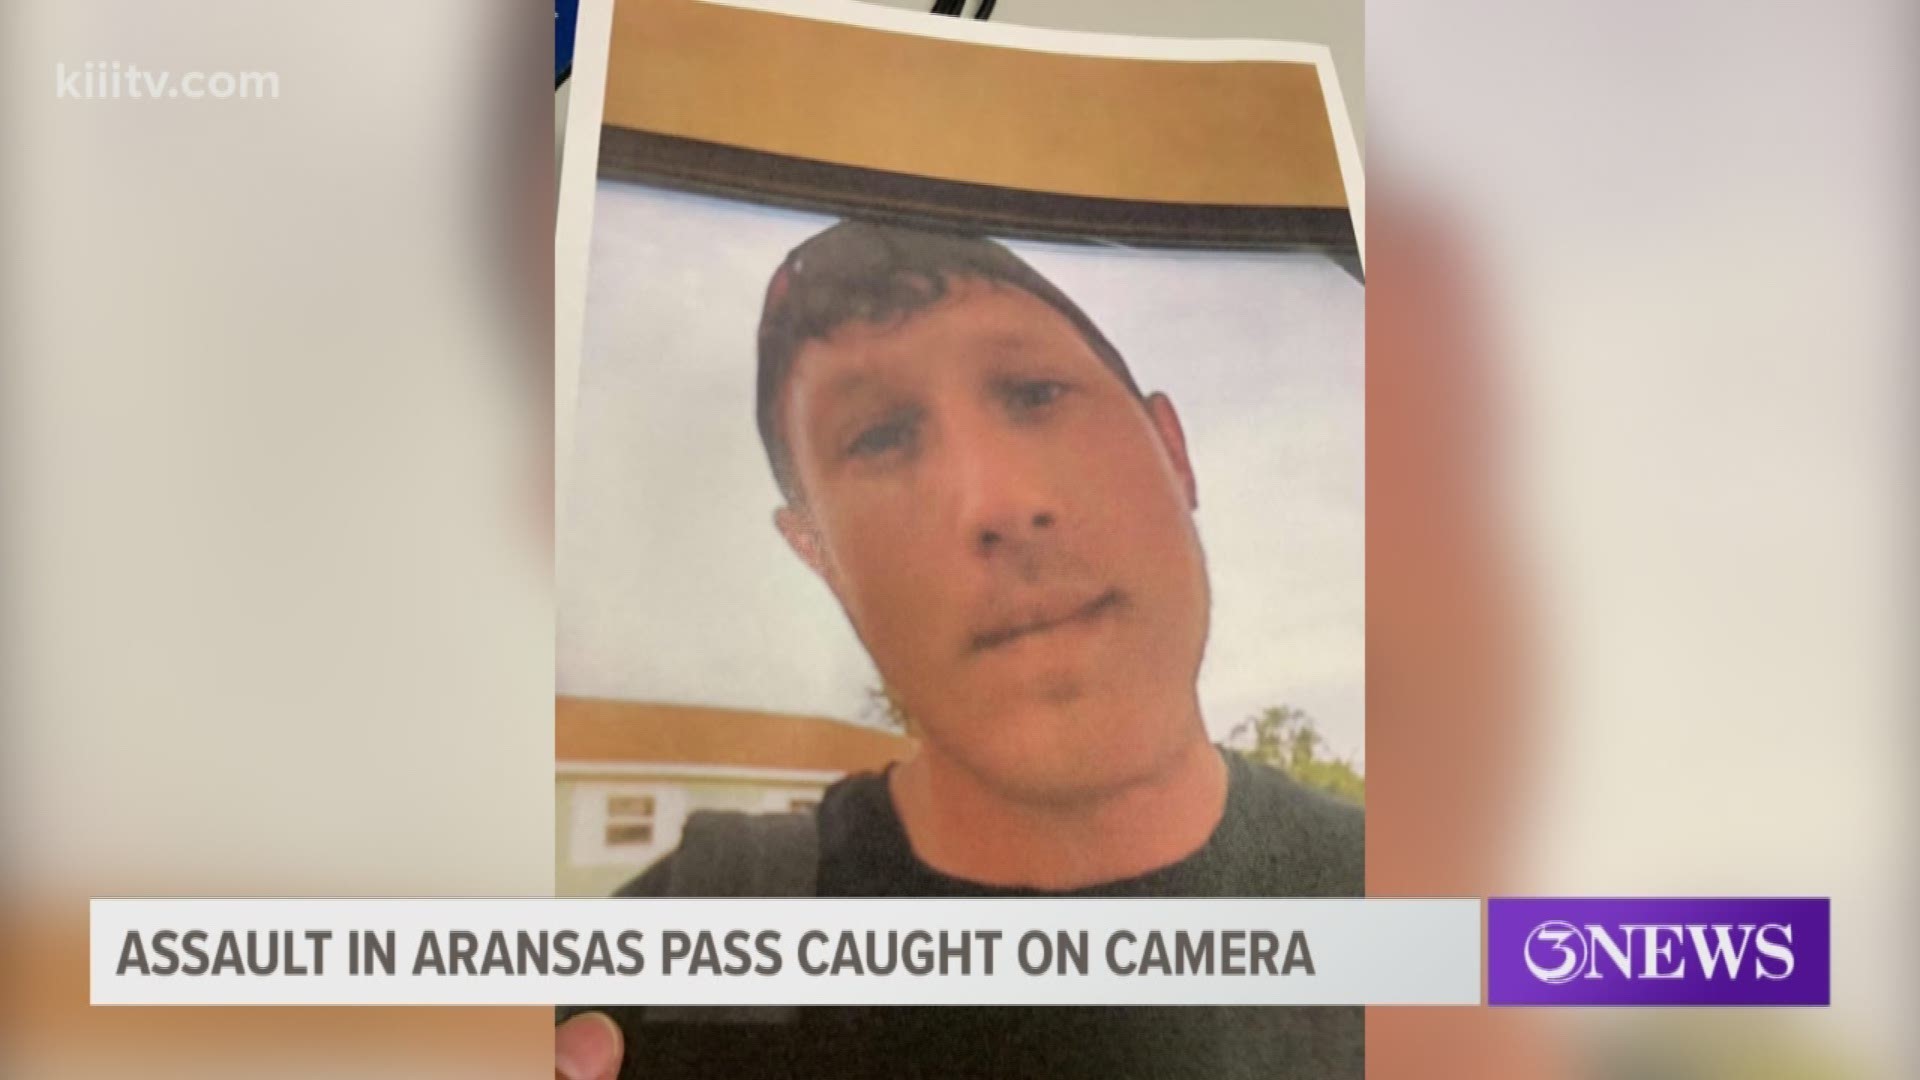 Aransas Pass police look for man accused of assault